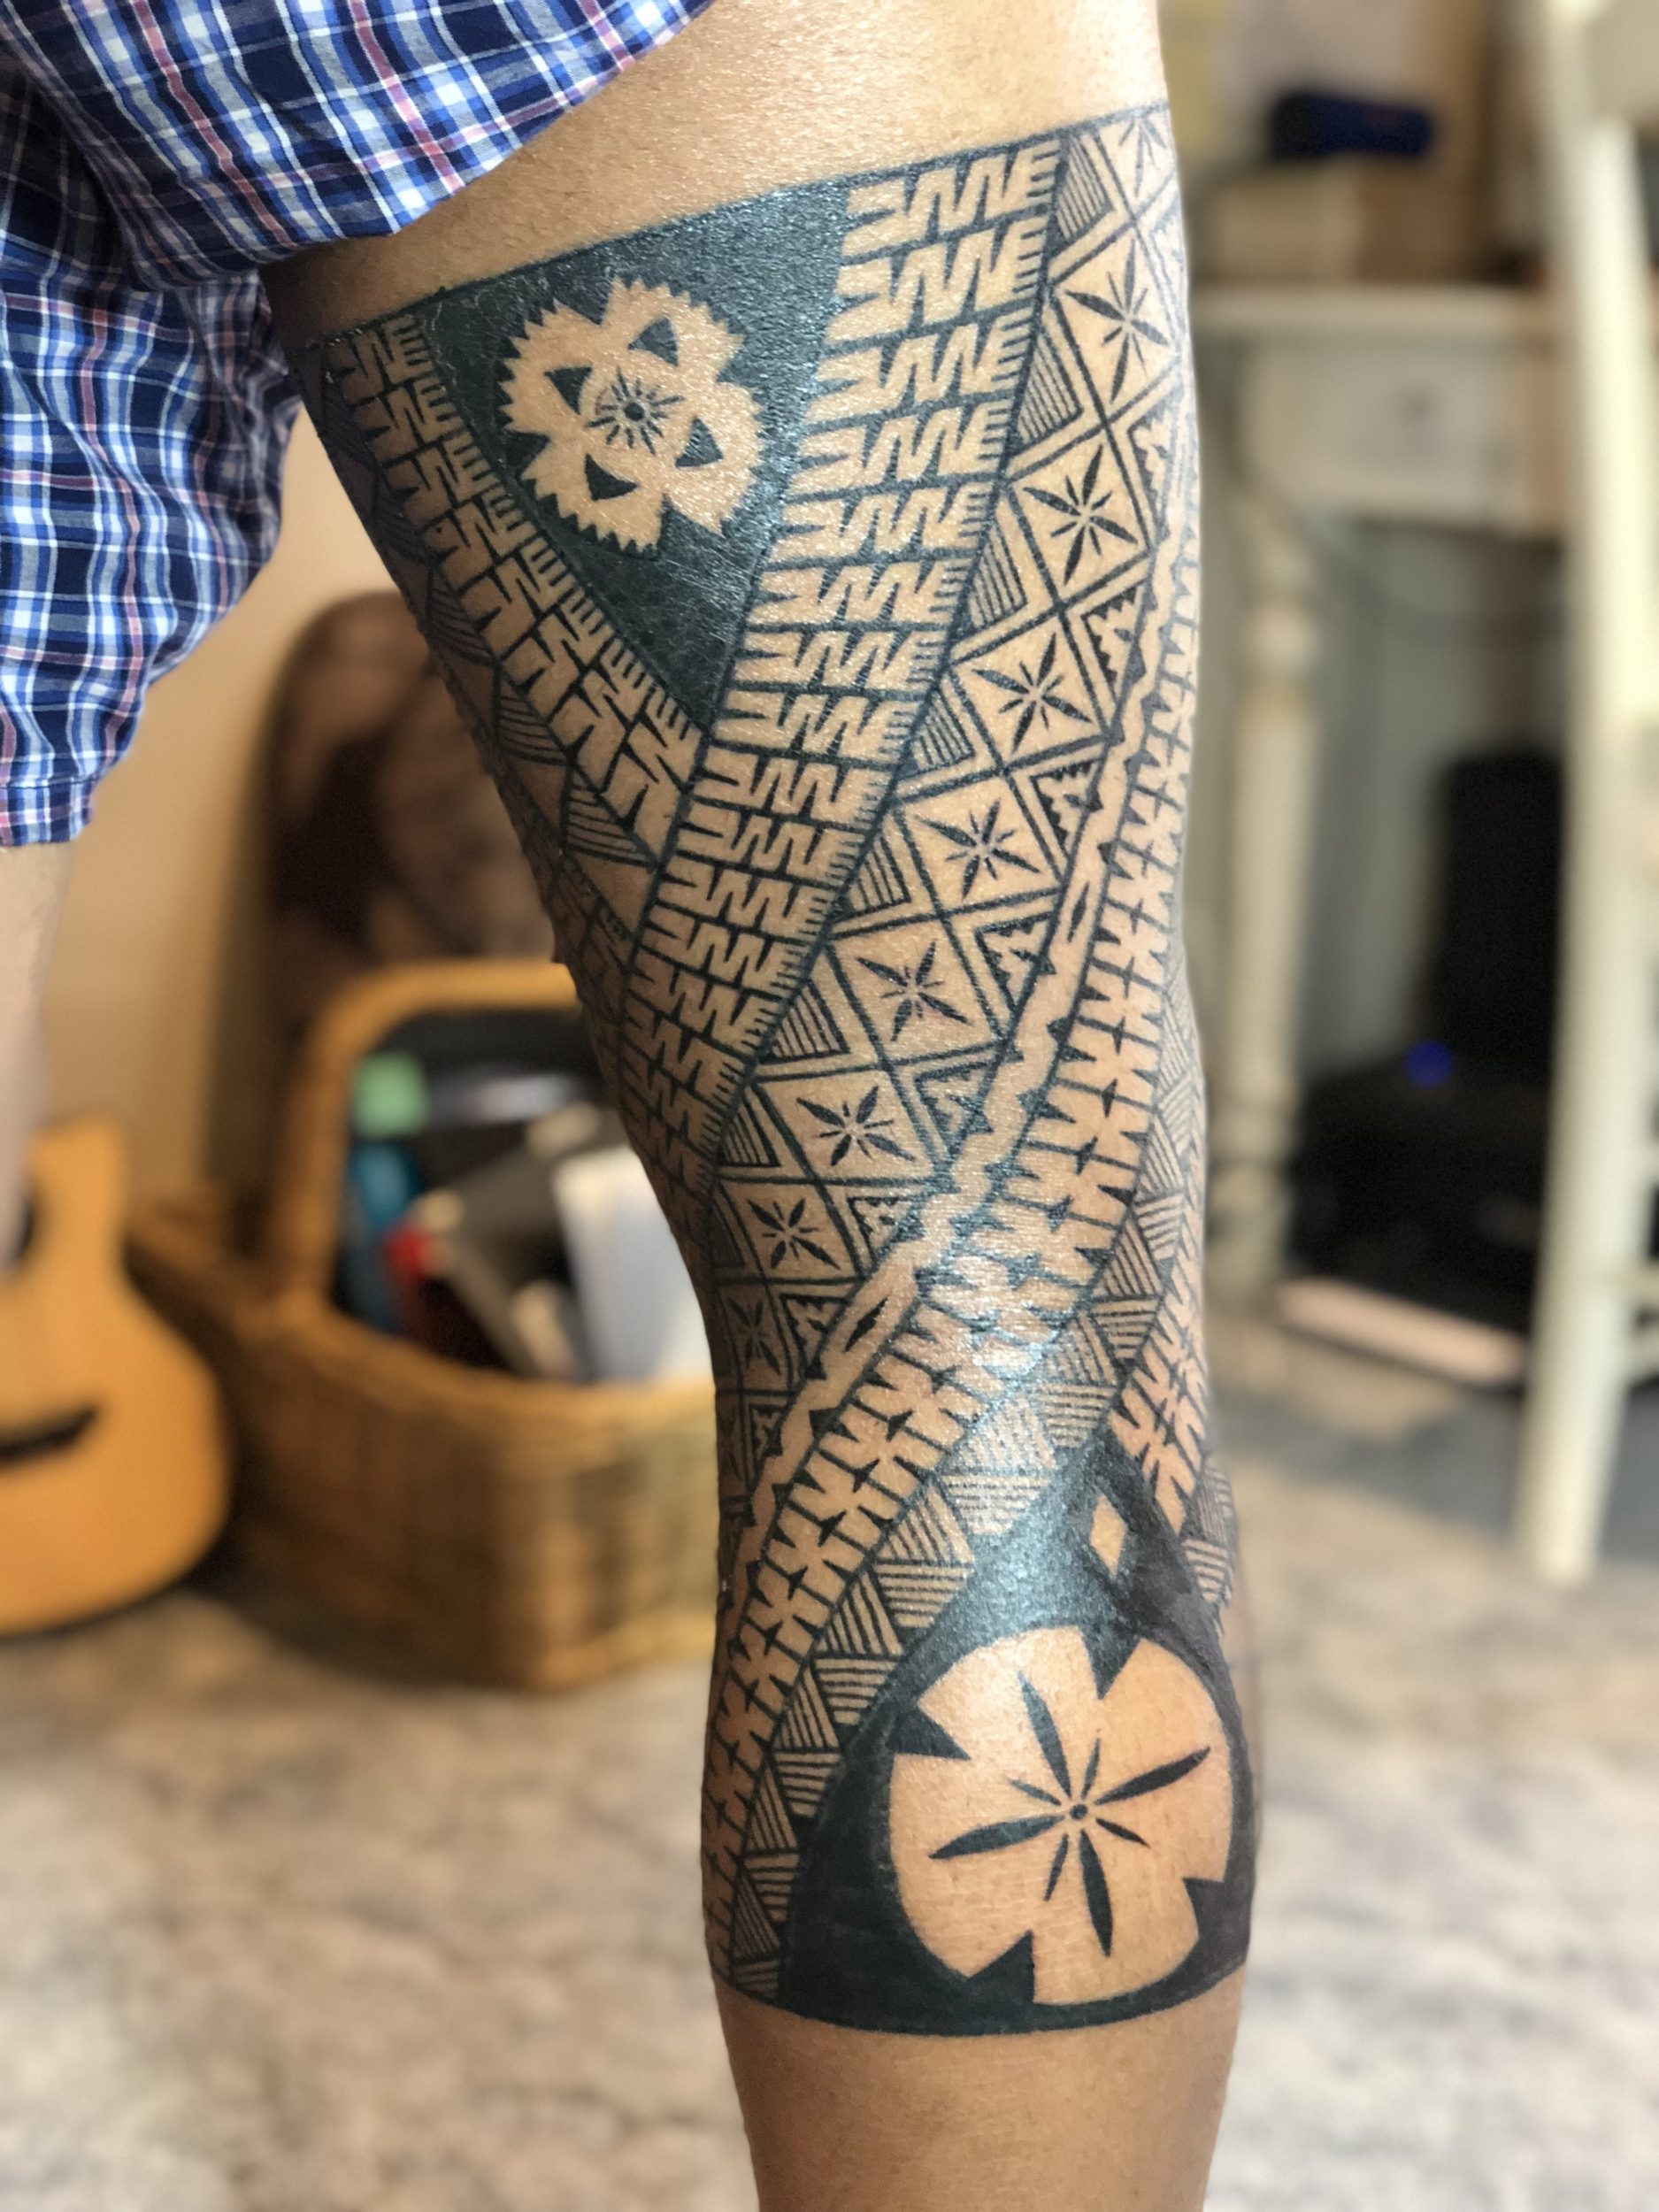 Polynesian tattoos - Guide to the main styles